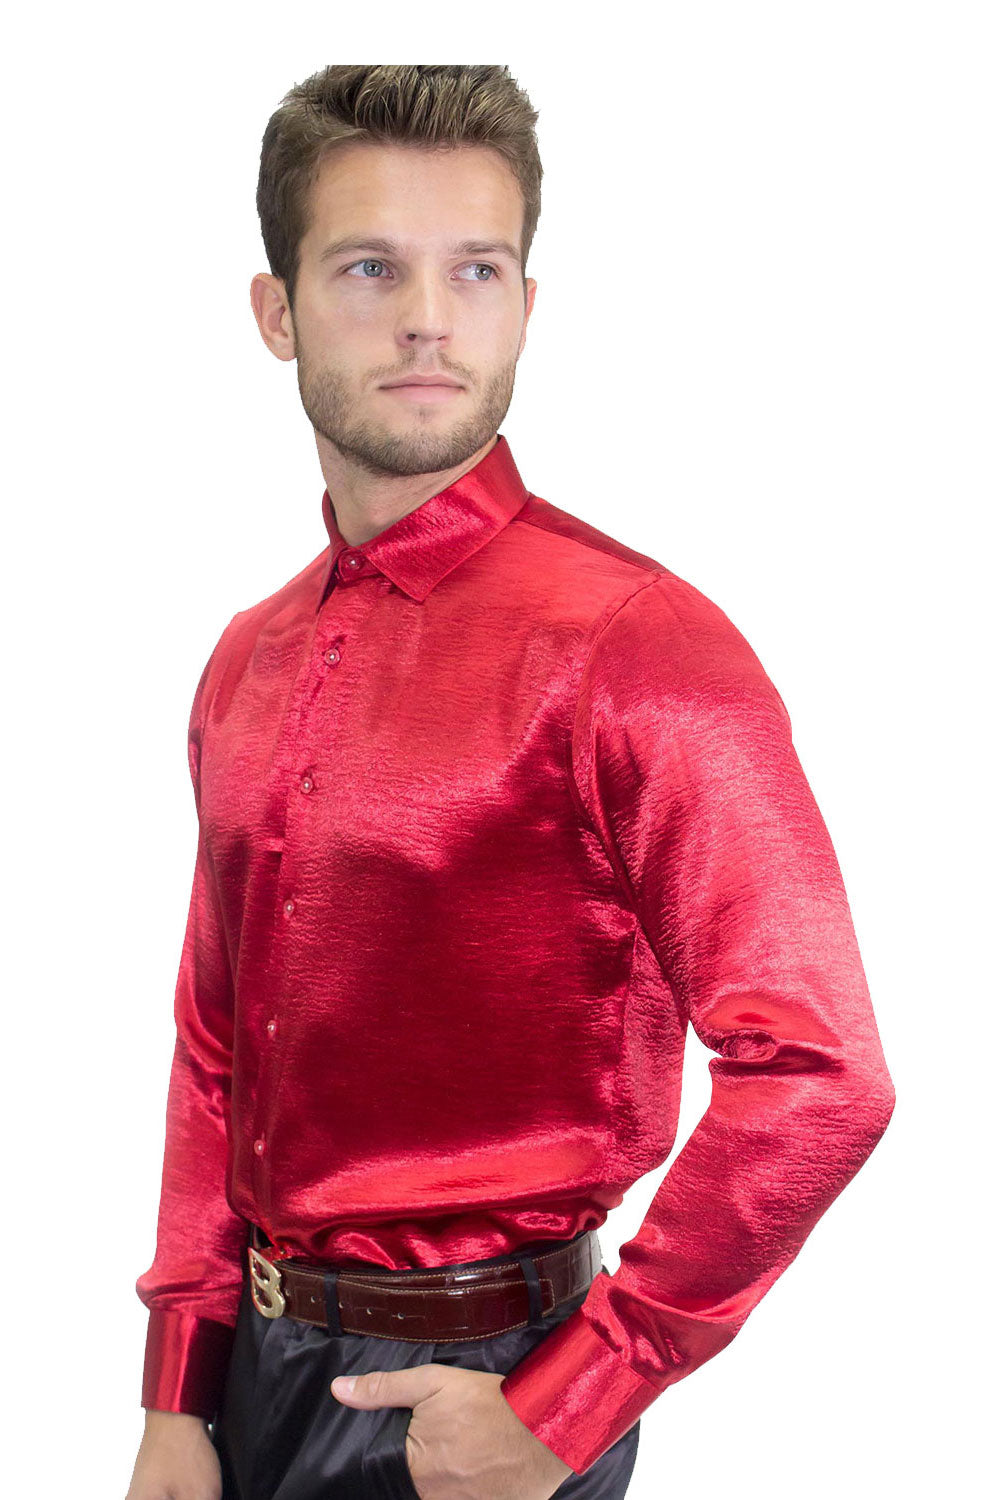 Men's Shinny Solid Color Button Down Long Sleeves Shirts B3202 Red